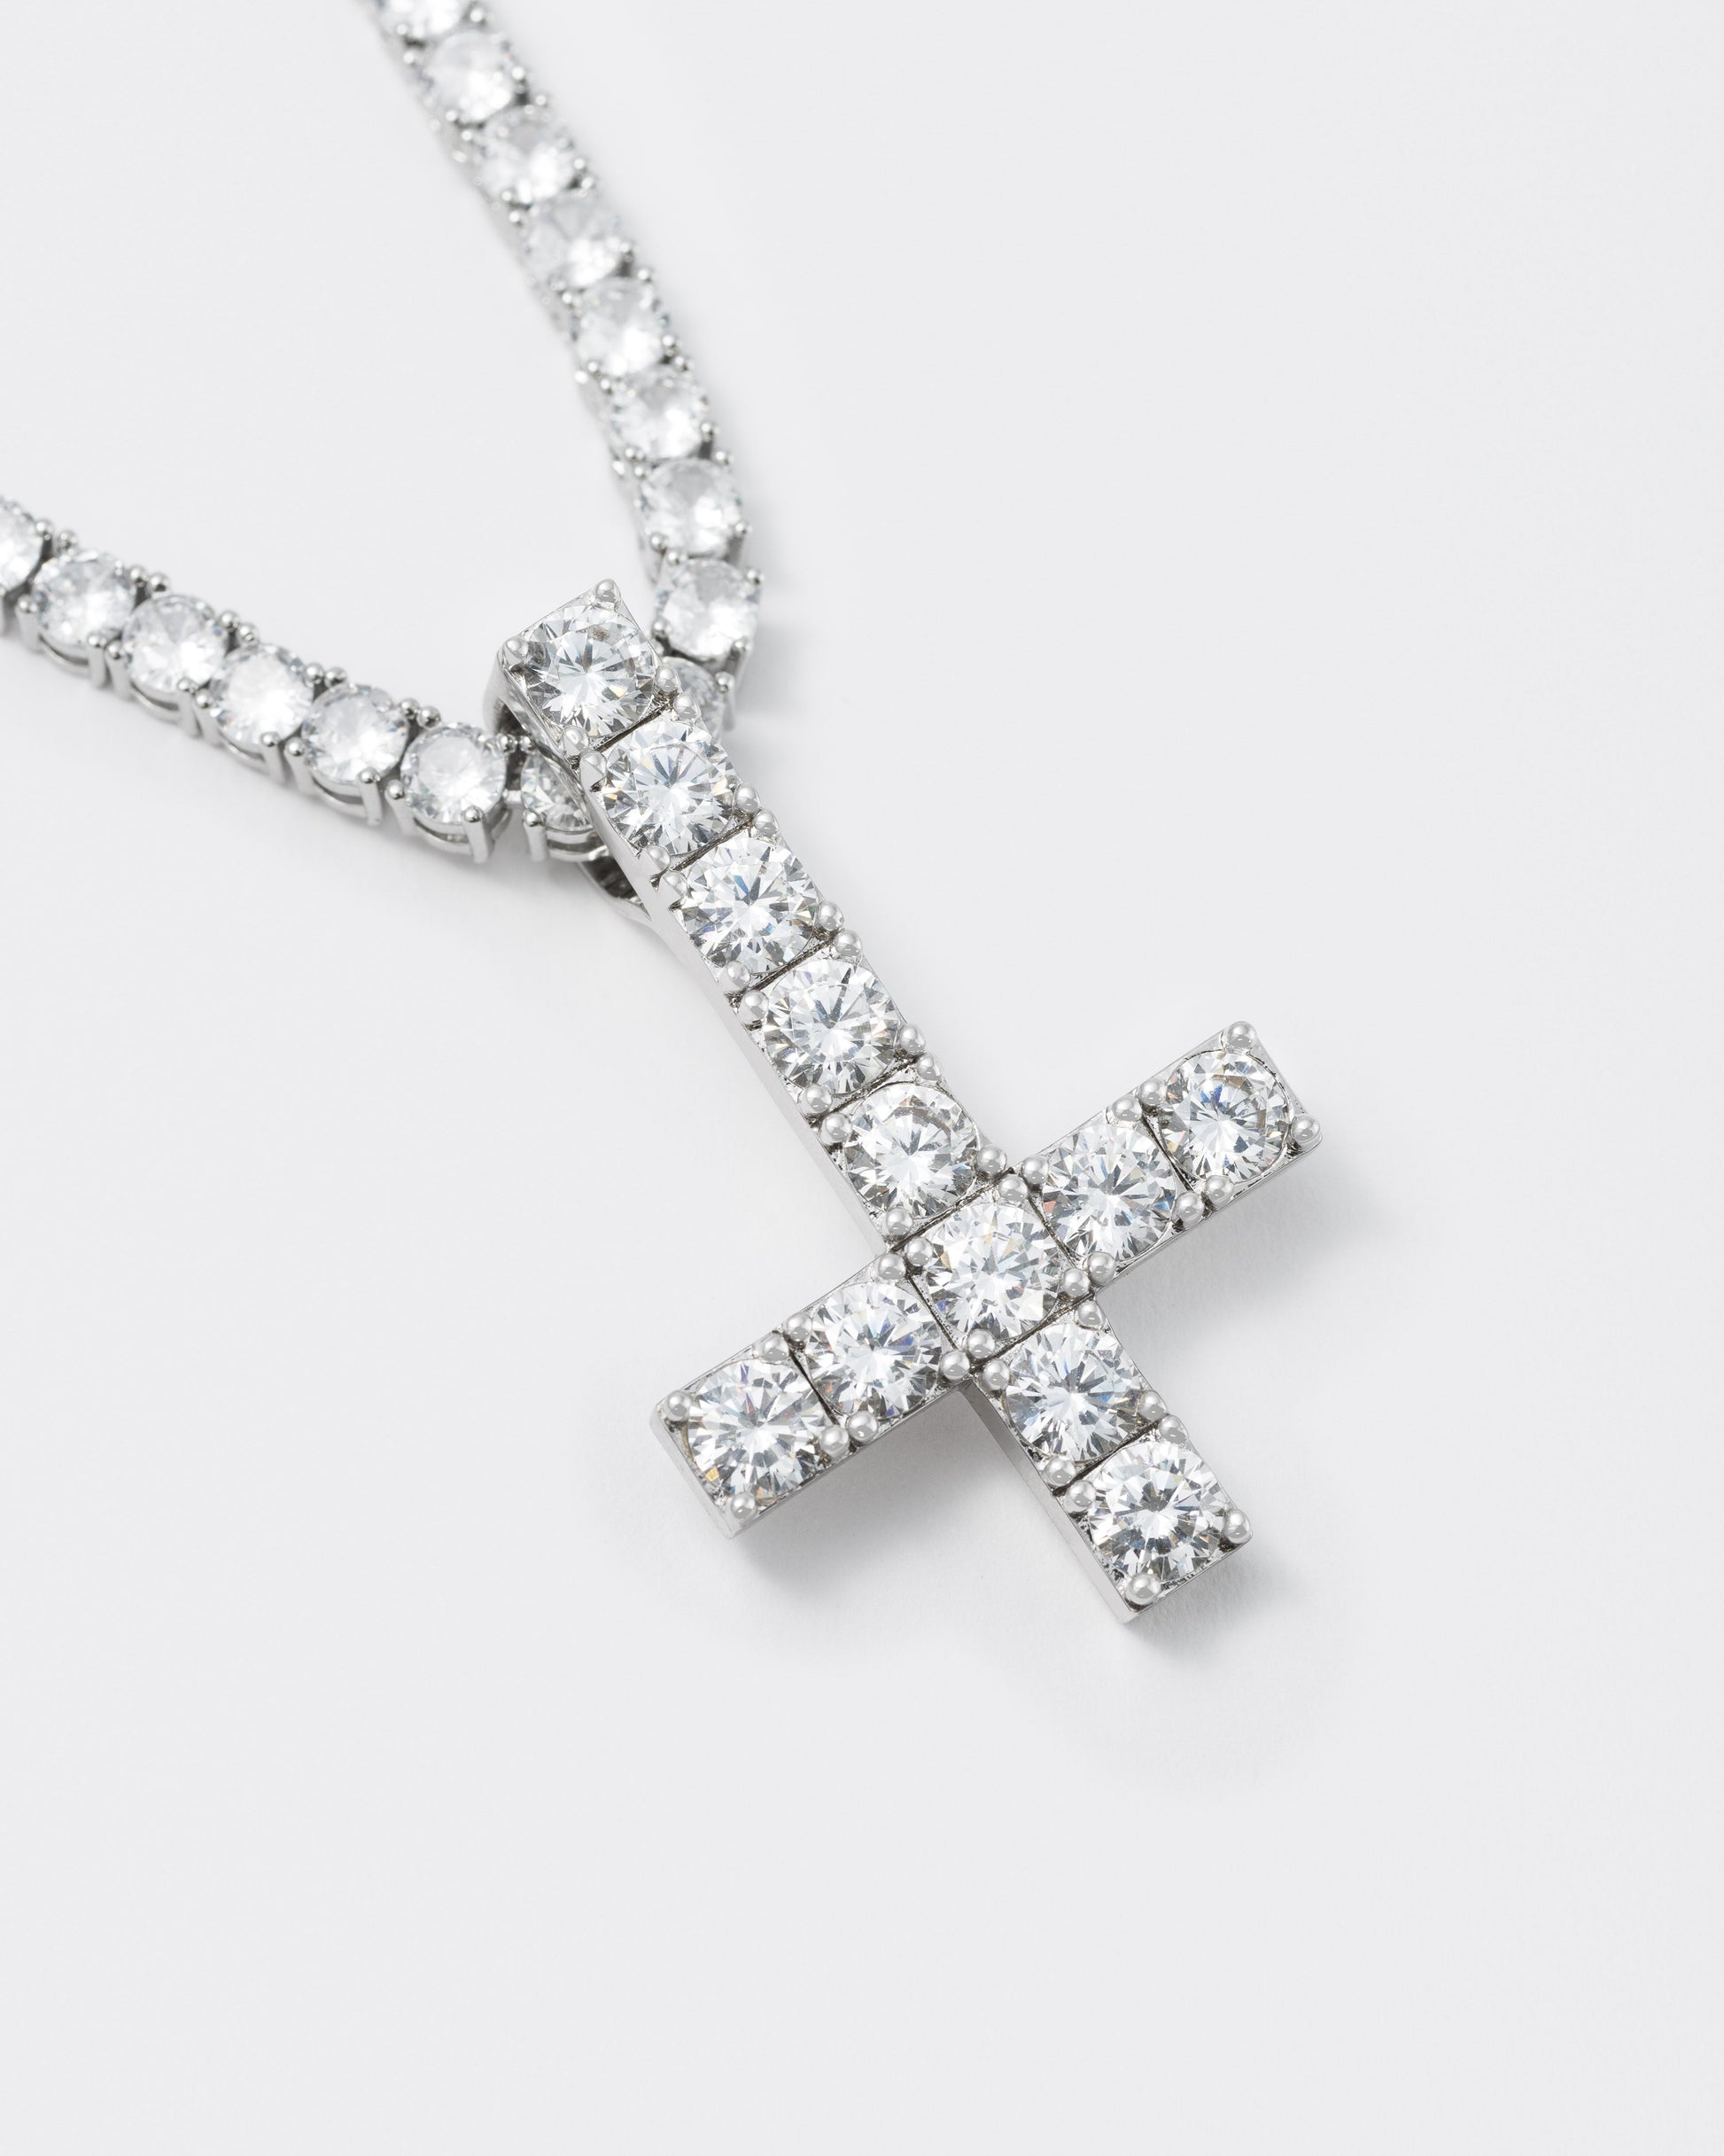 Detail of detail of 18k white gold reversed coated cross pendant necklace with hand-set stones in white and tennis chain